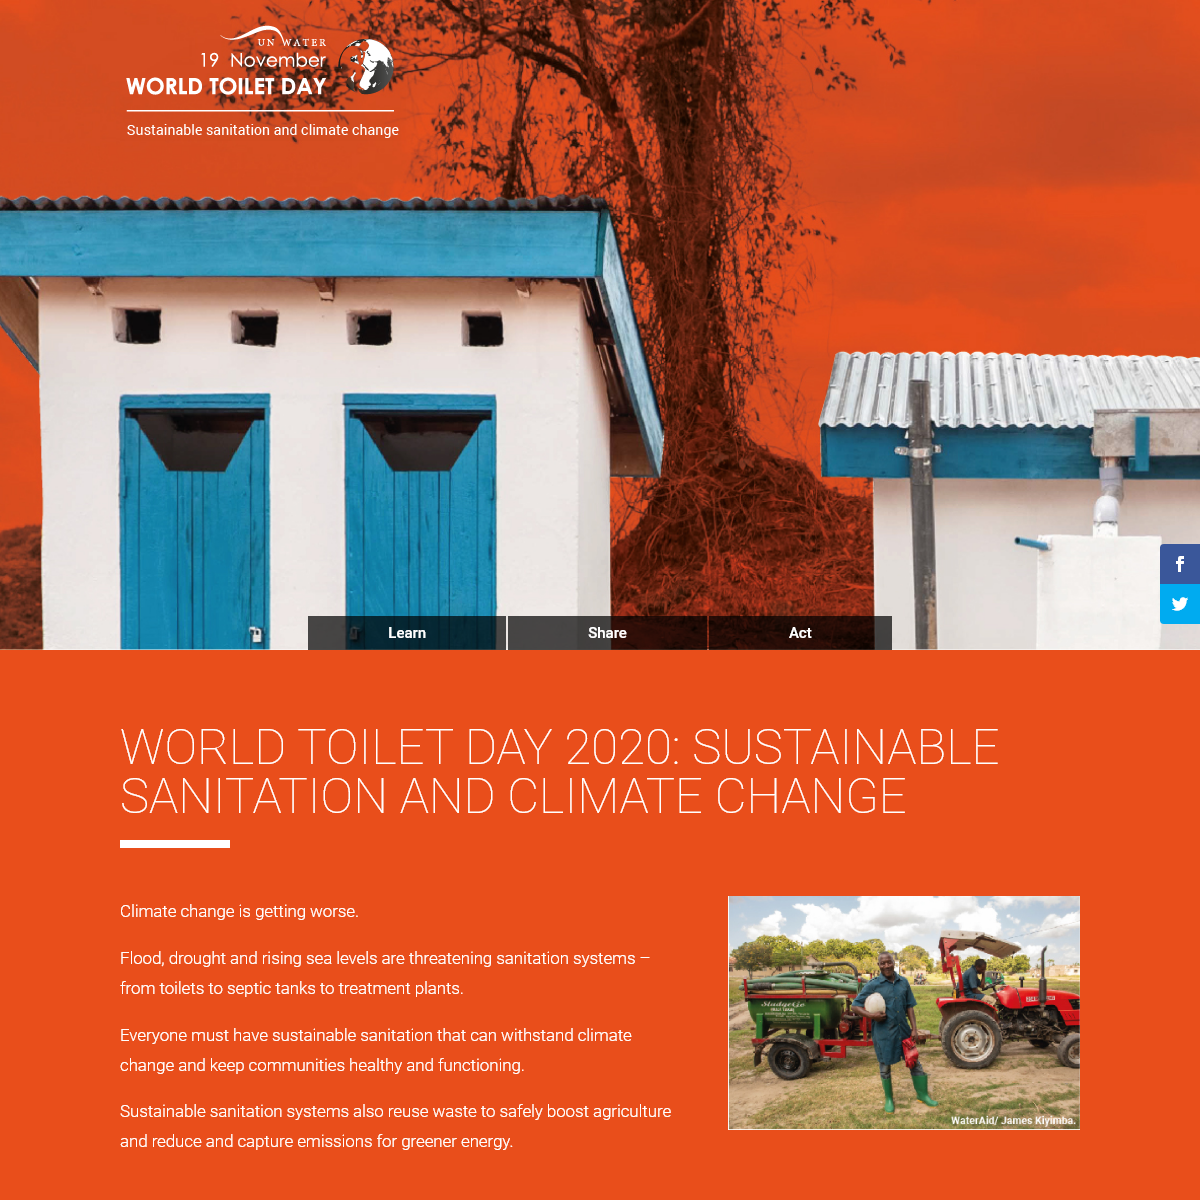 A complete backup of worldtoiletday.org